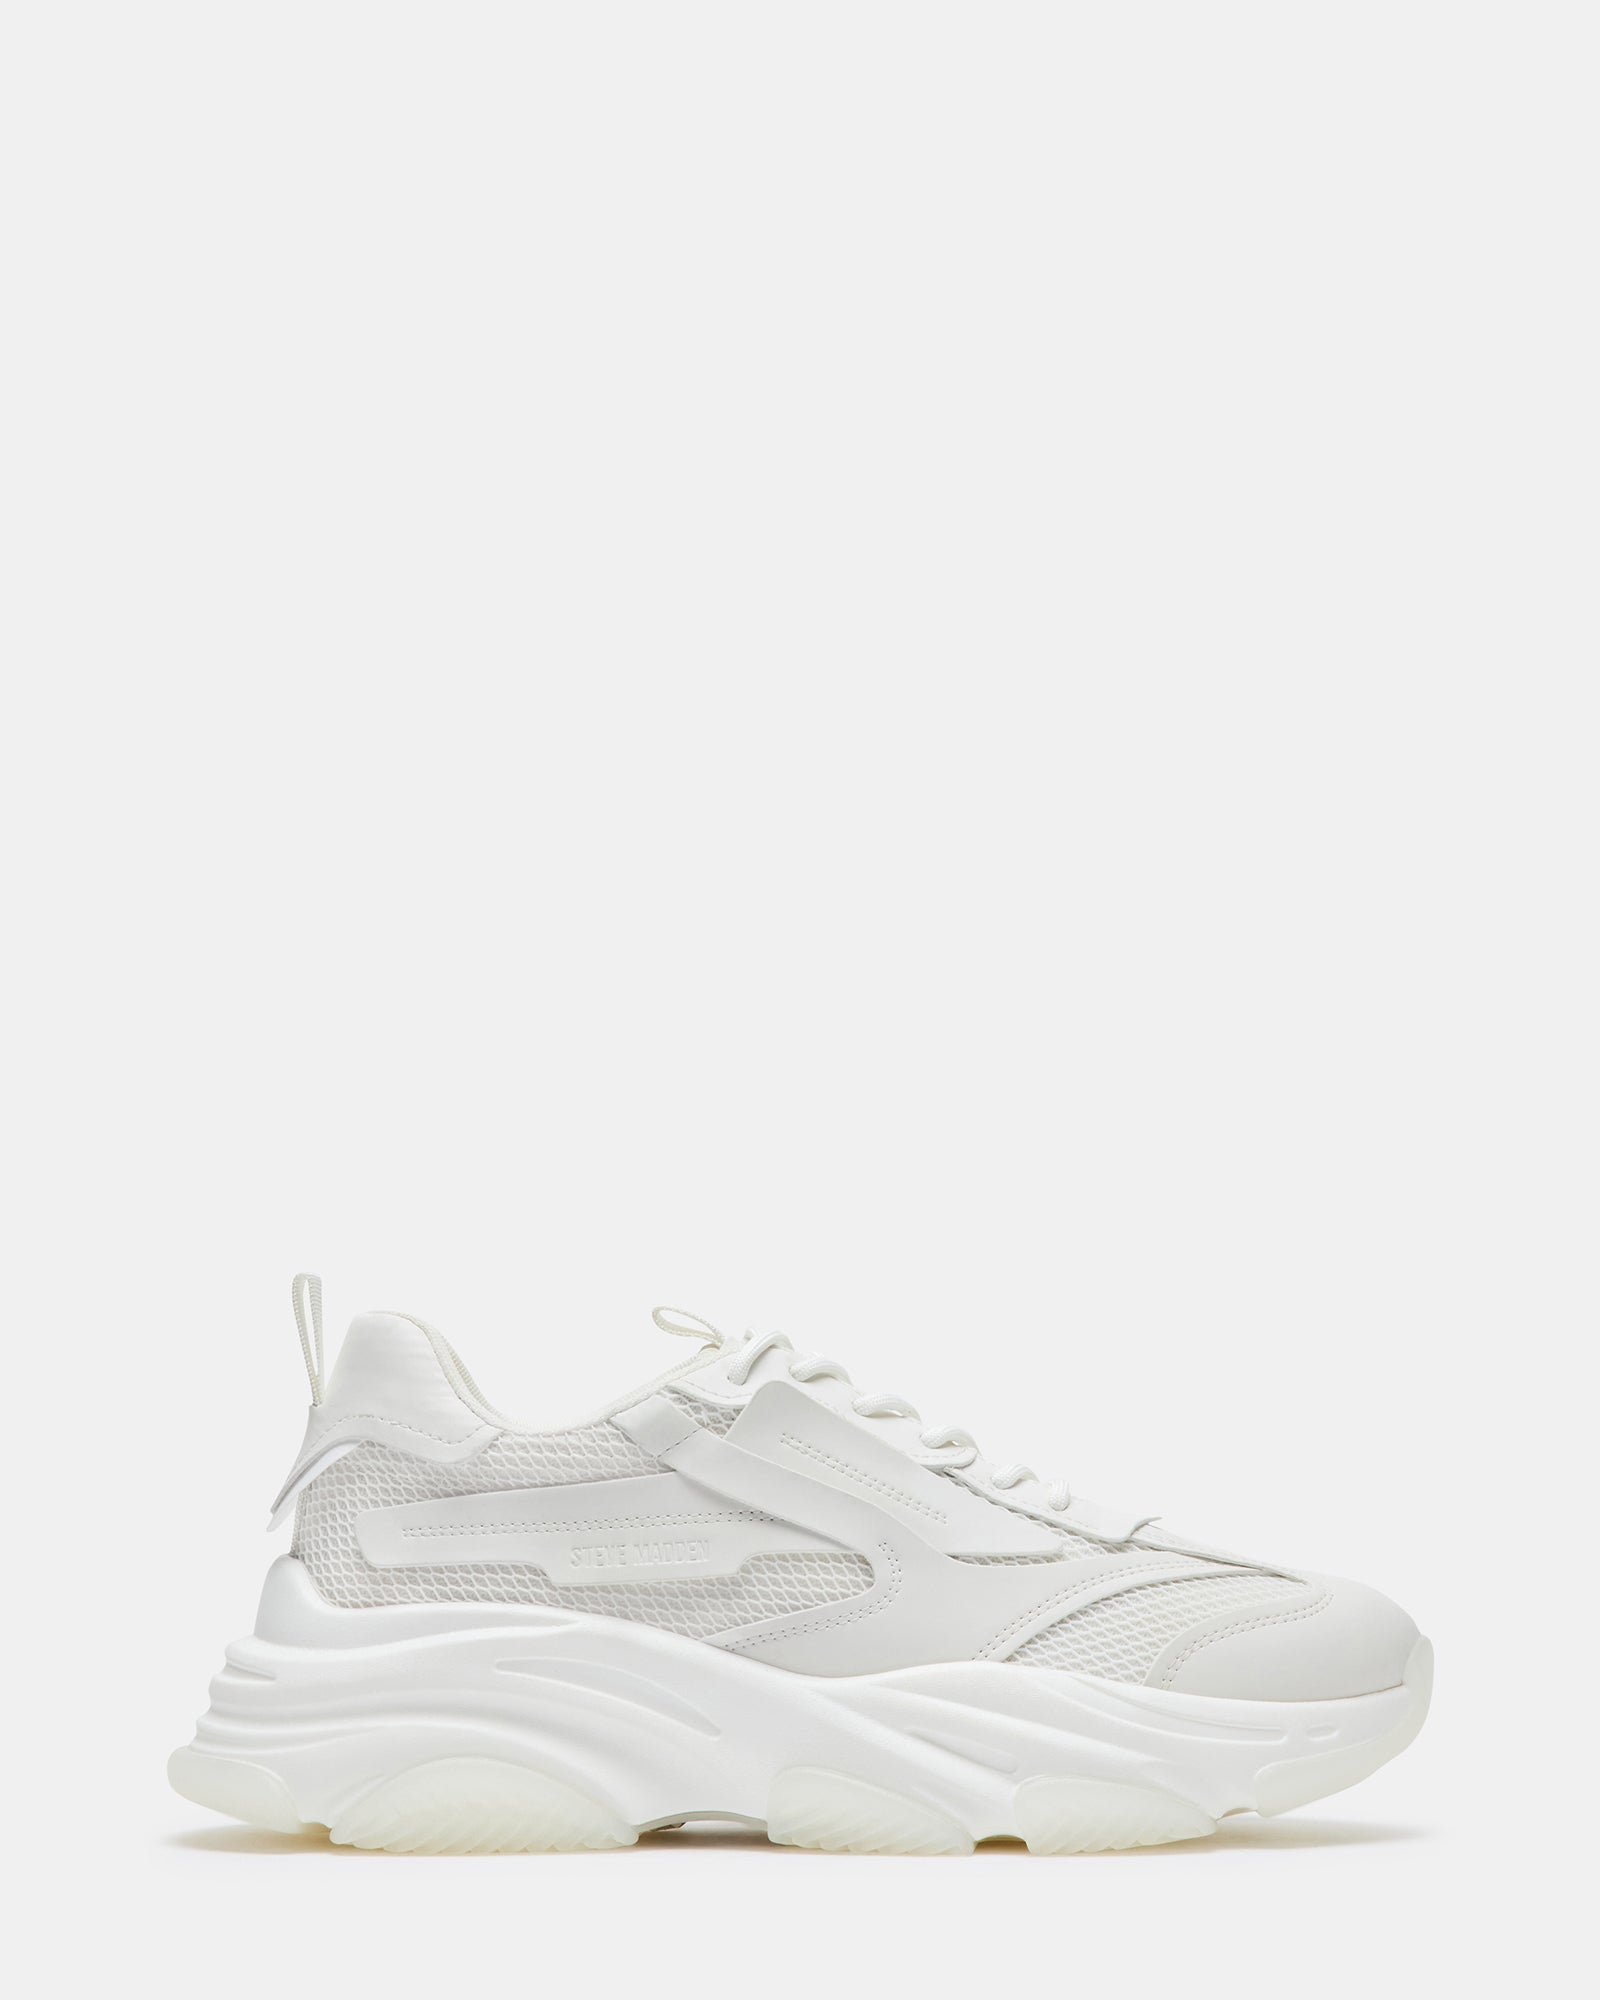 Puma CA Pro tonal sneakers in off white and neutral - exclusive to ASOS |  ASOS